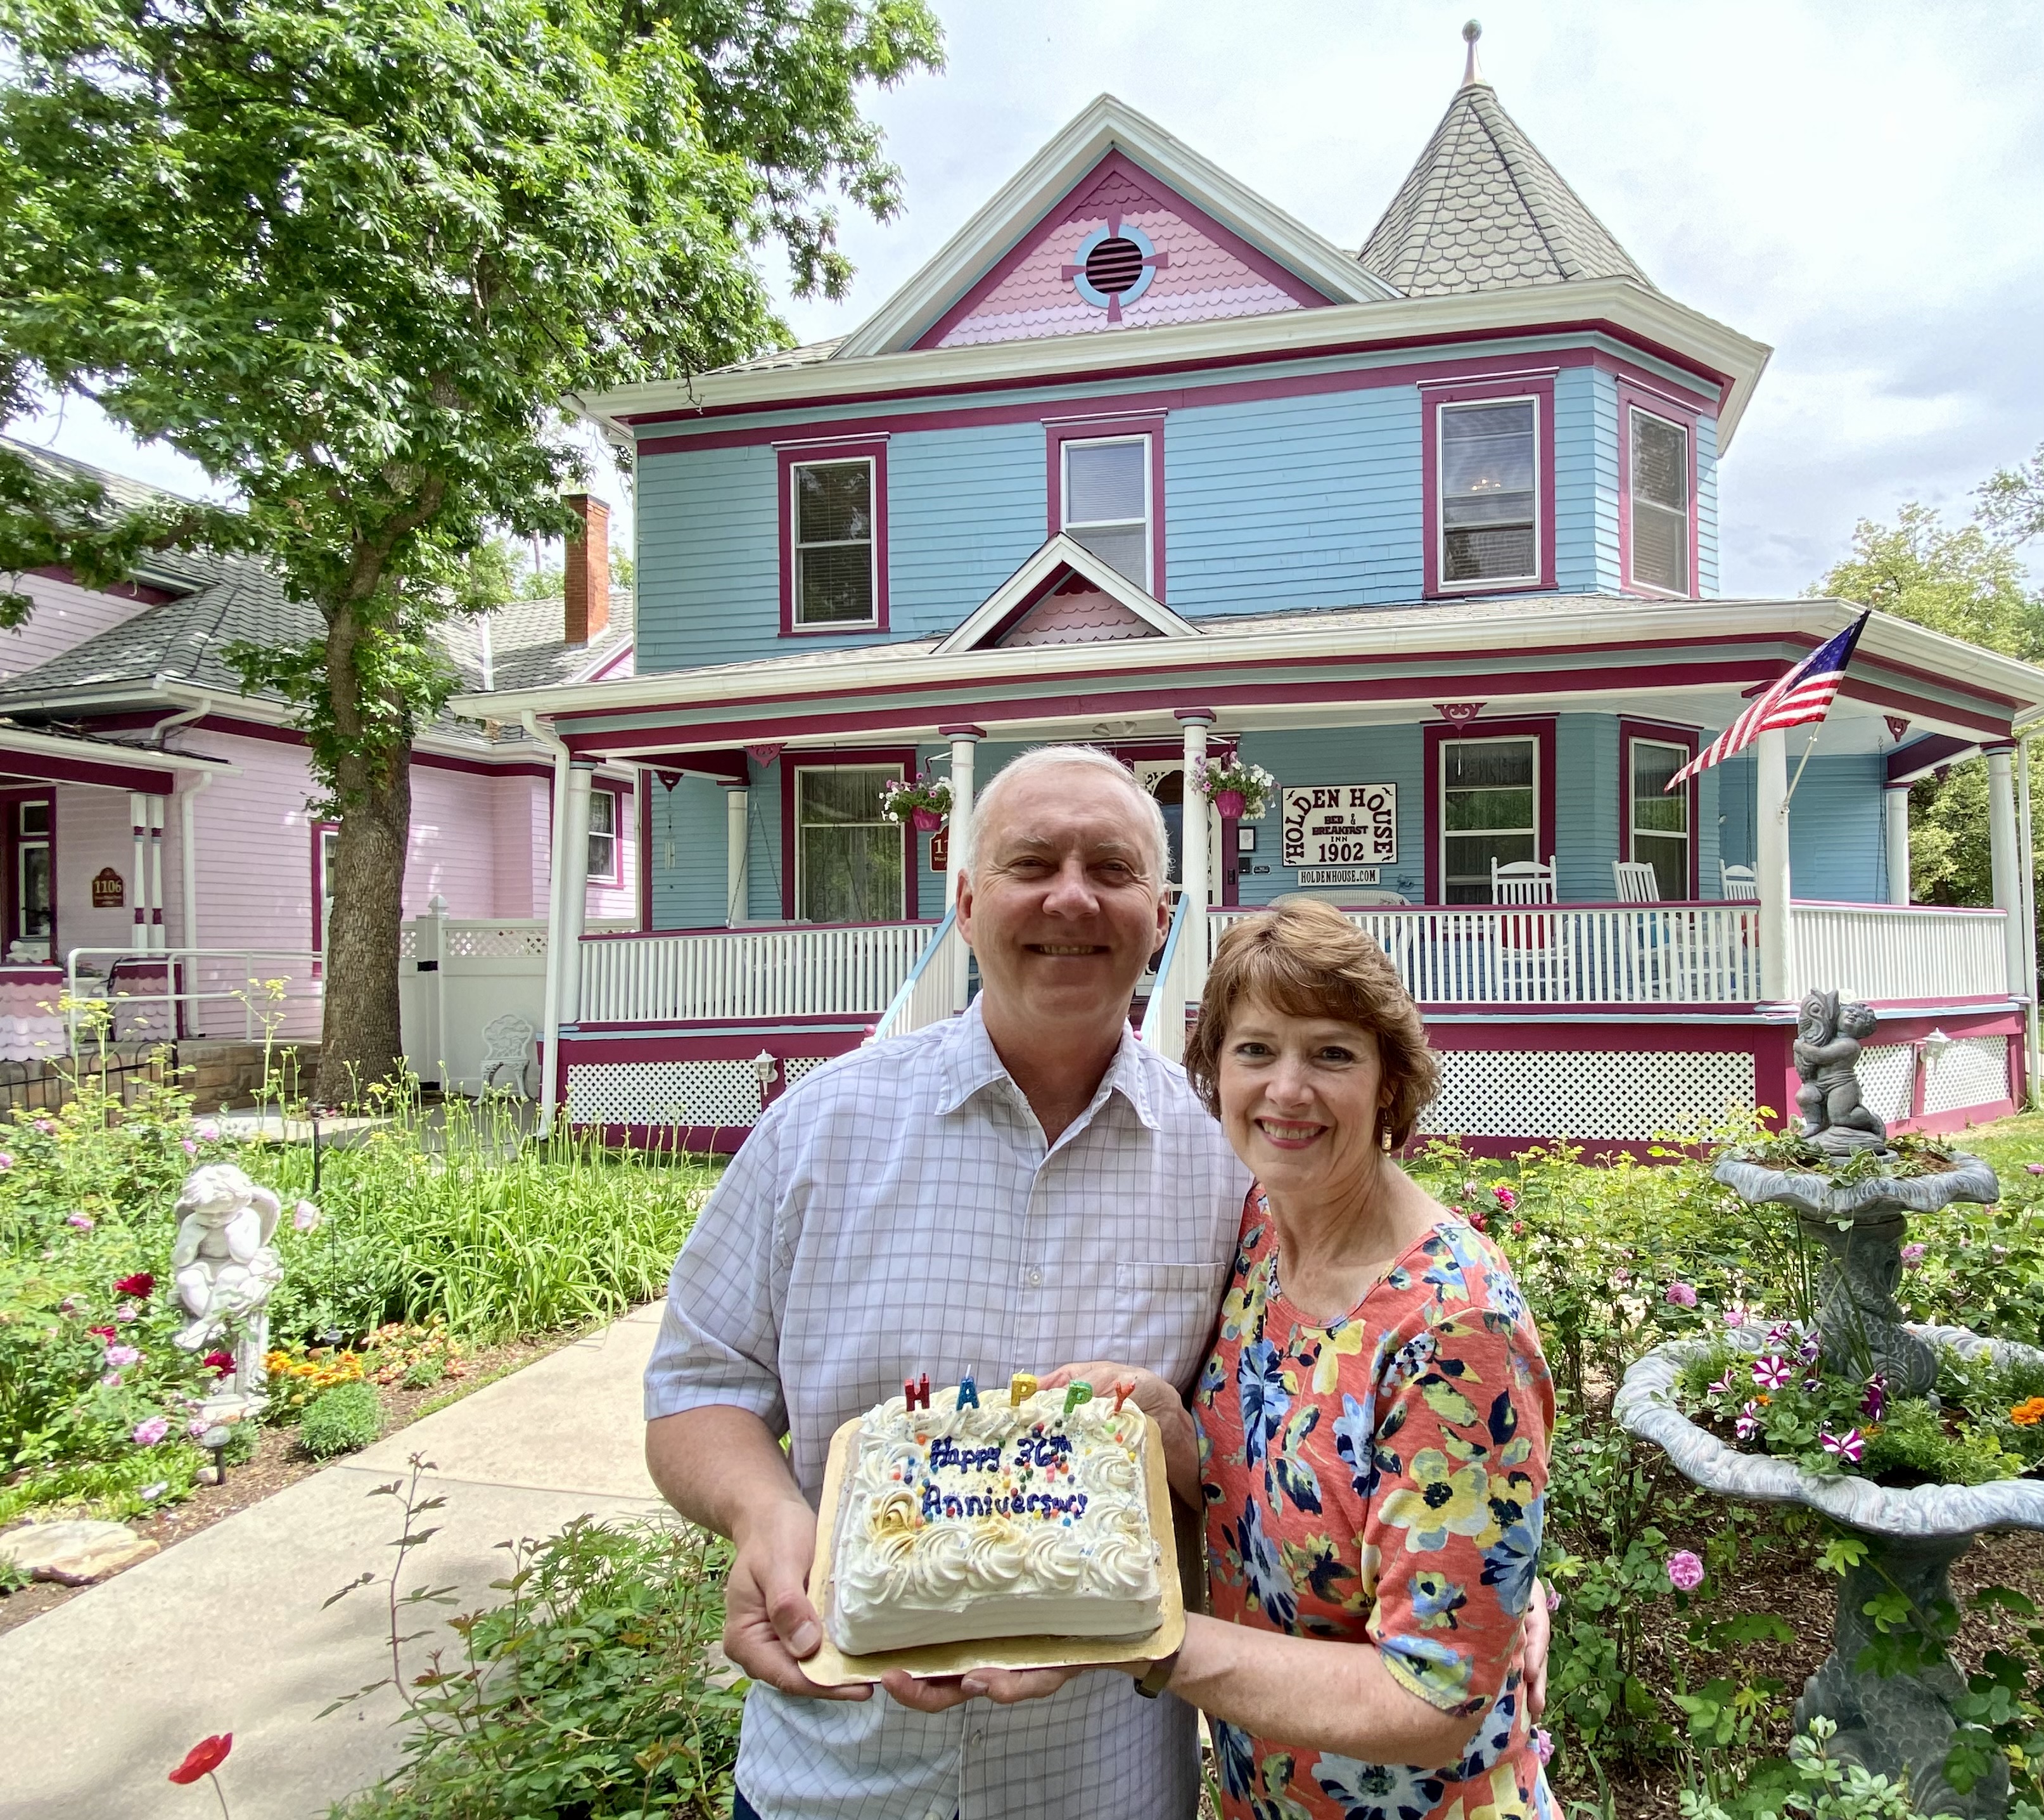 Historic Holden House 1902 Bed & Breakfast Inn Celebrates 36th Year Milestone – Credits Quality and Hospitality for Longevity